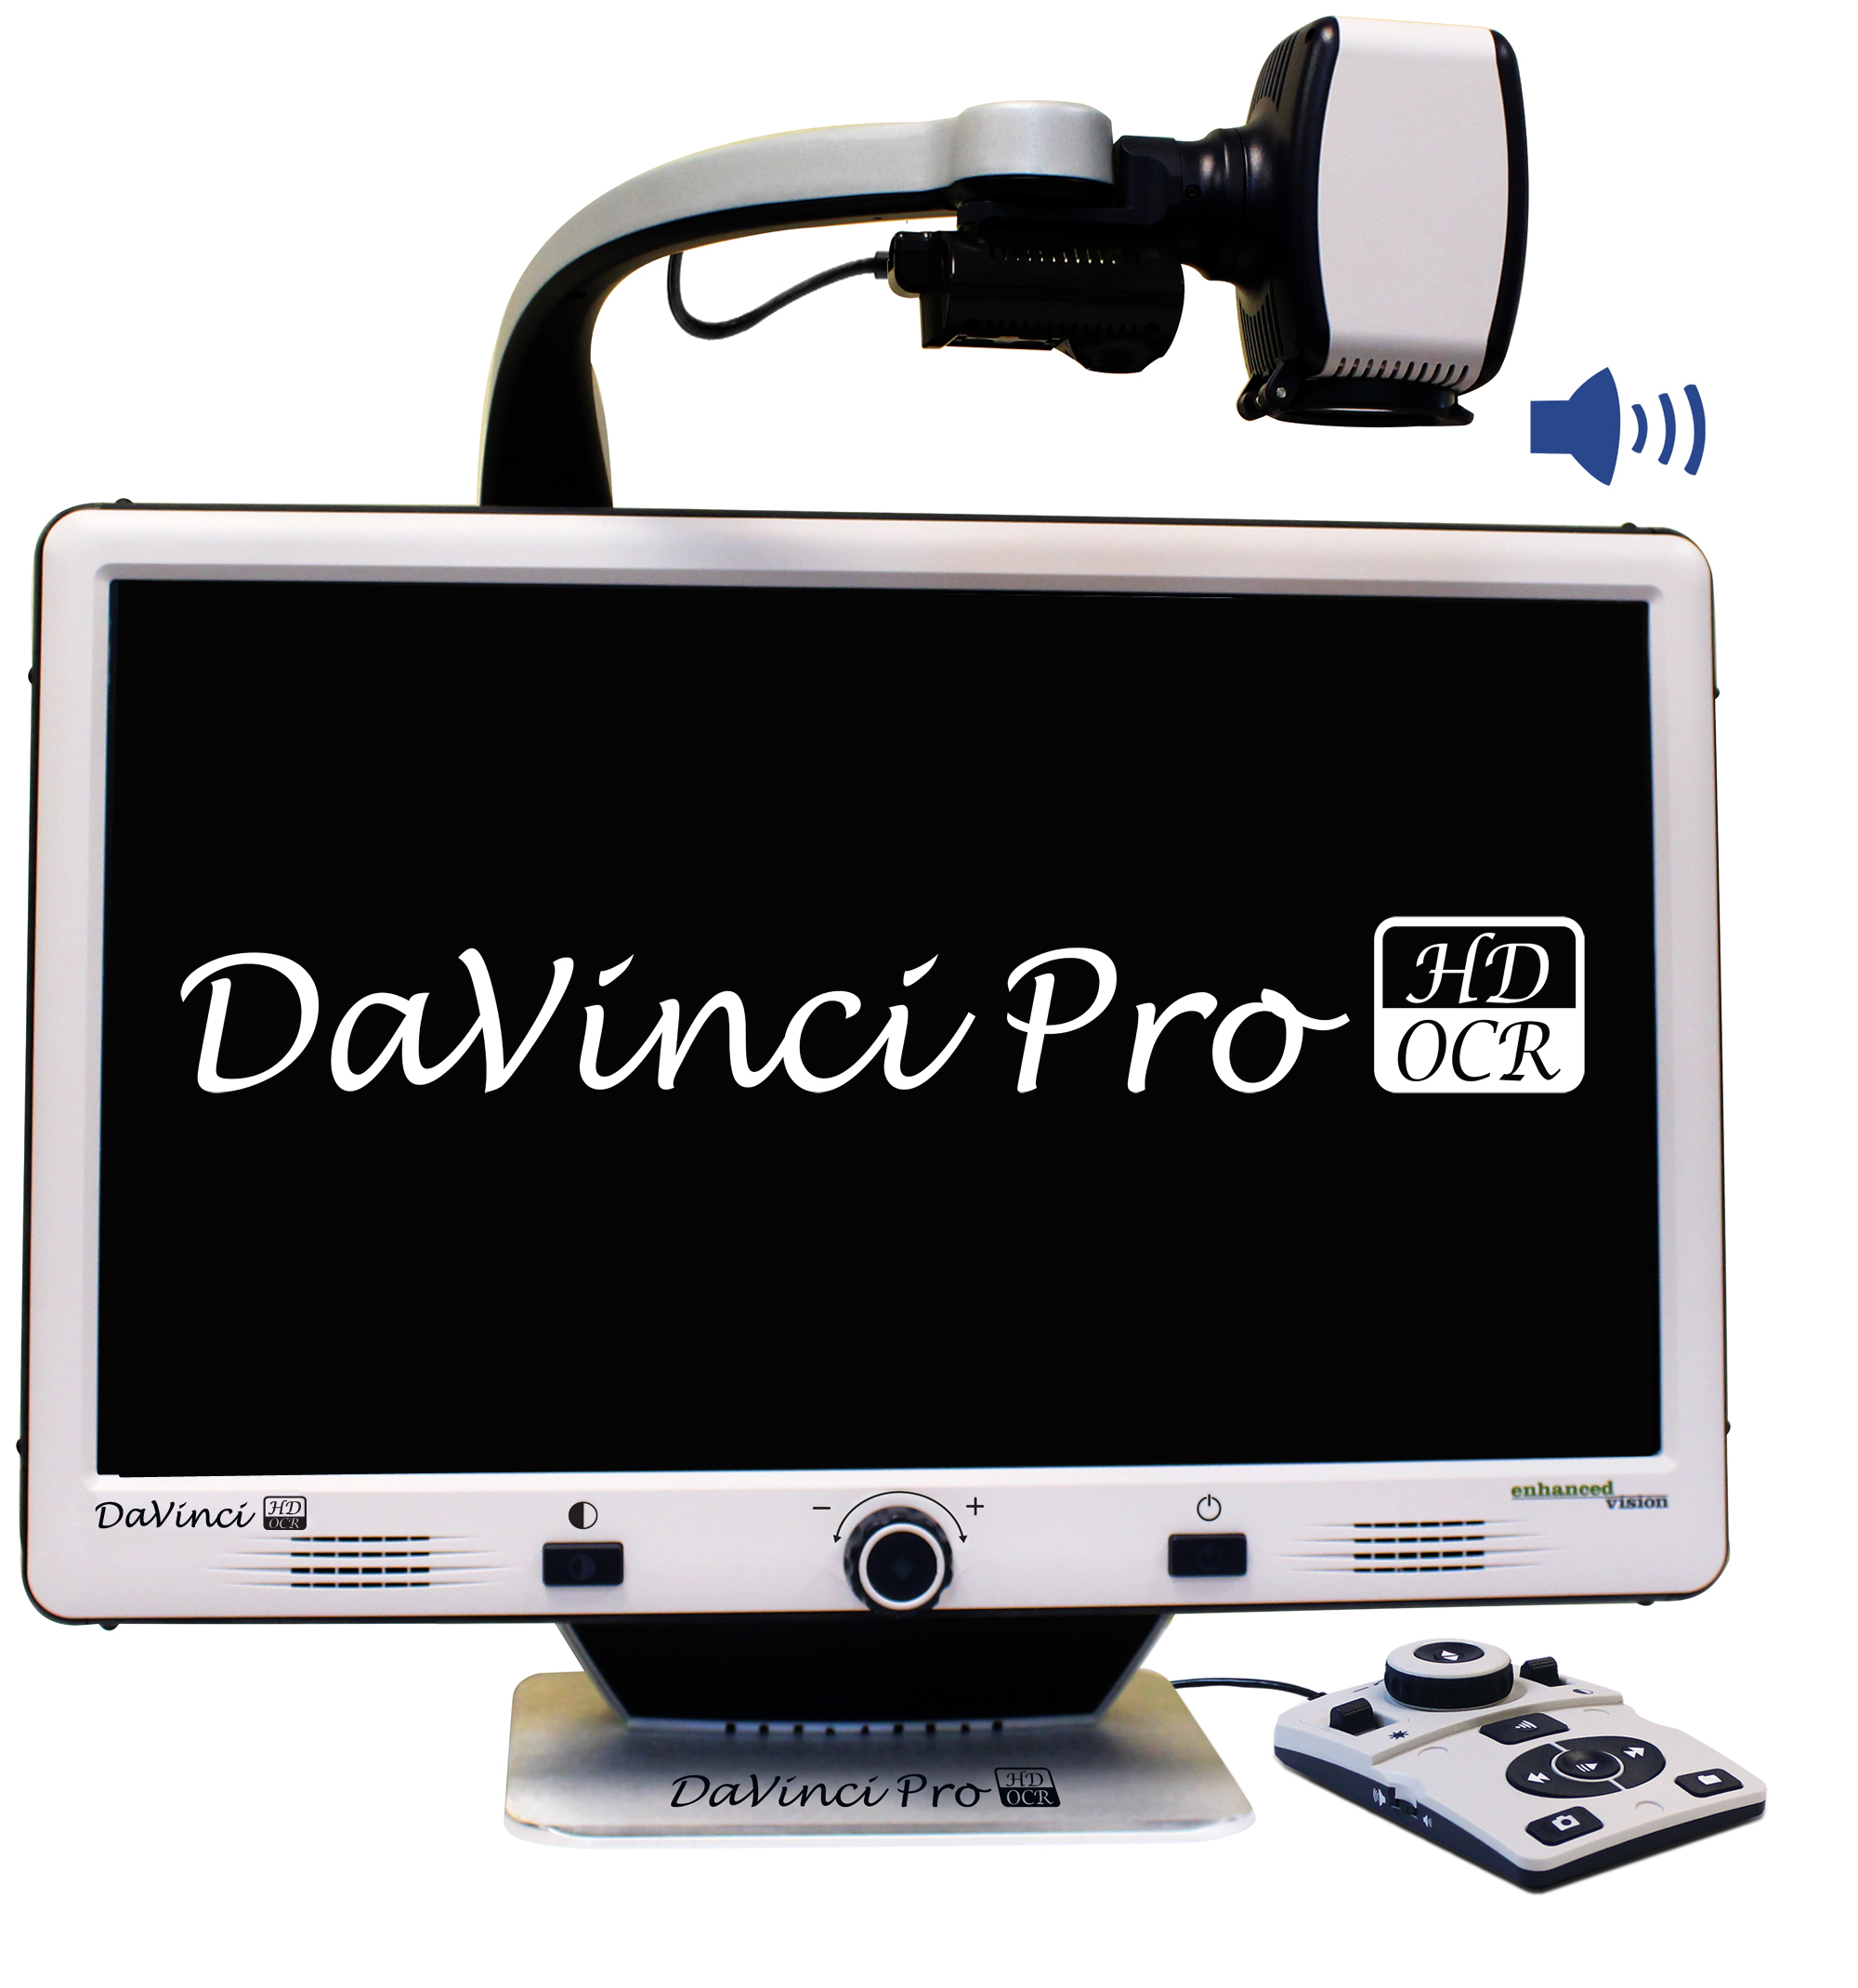 The DaVinci Pro Luggable video magnifier. ETLB can provide training on this product.